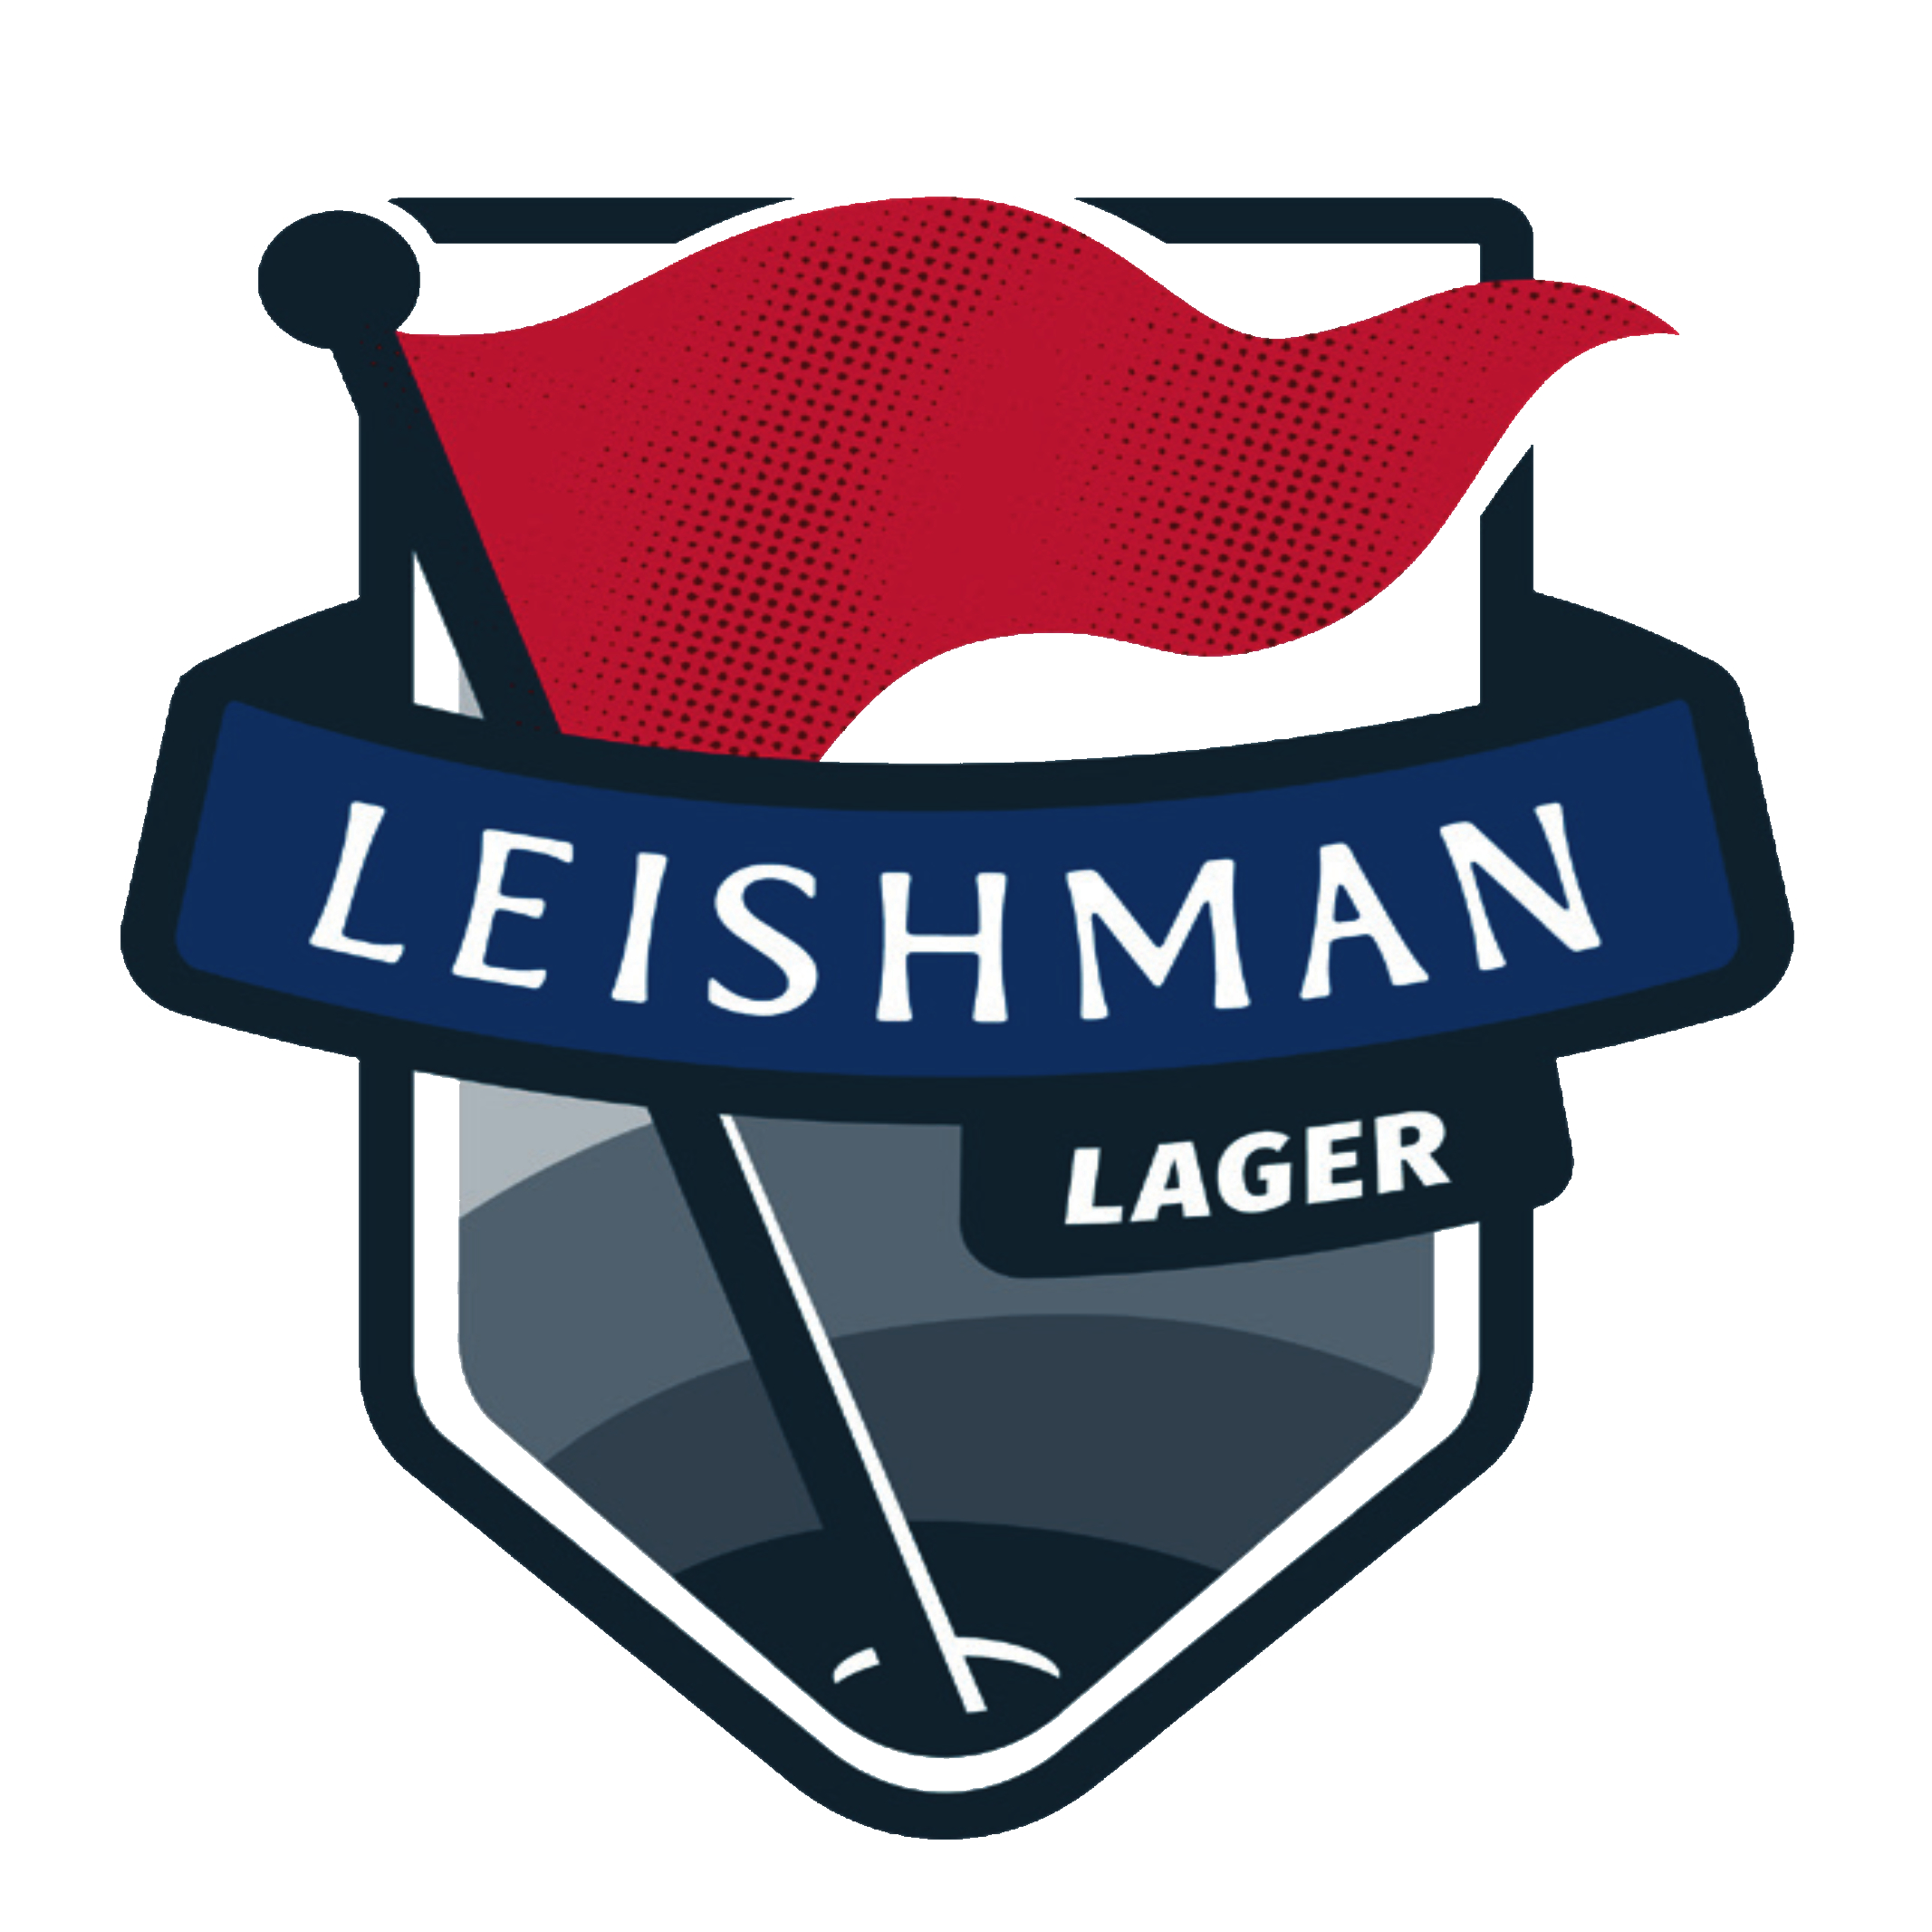 Leishman Lager | by Marc Leishman. A true Australian Lager created for on and off the golf course